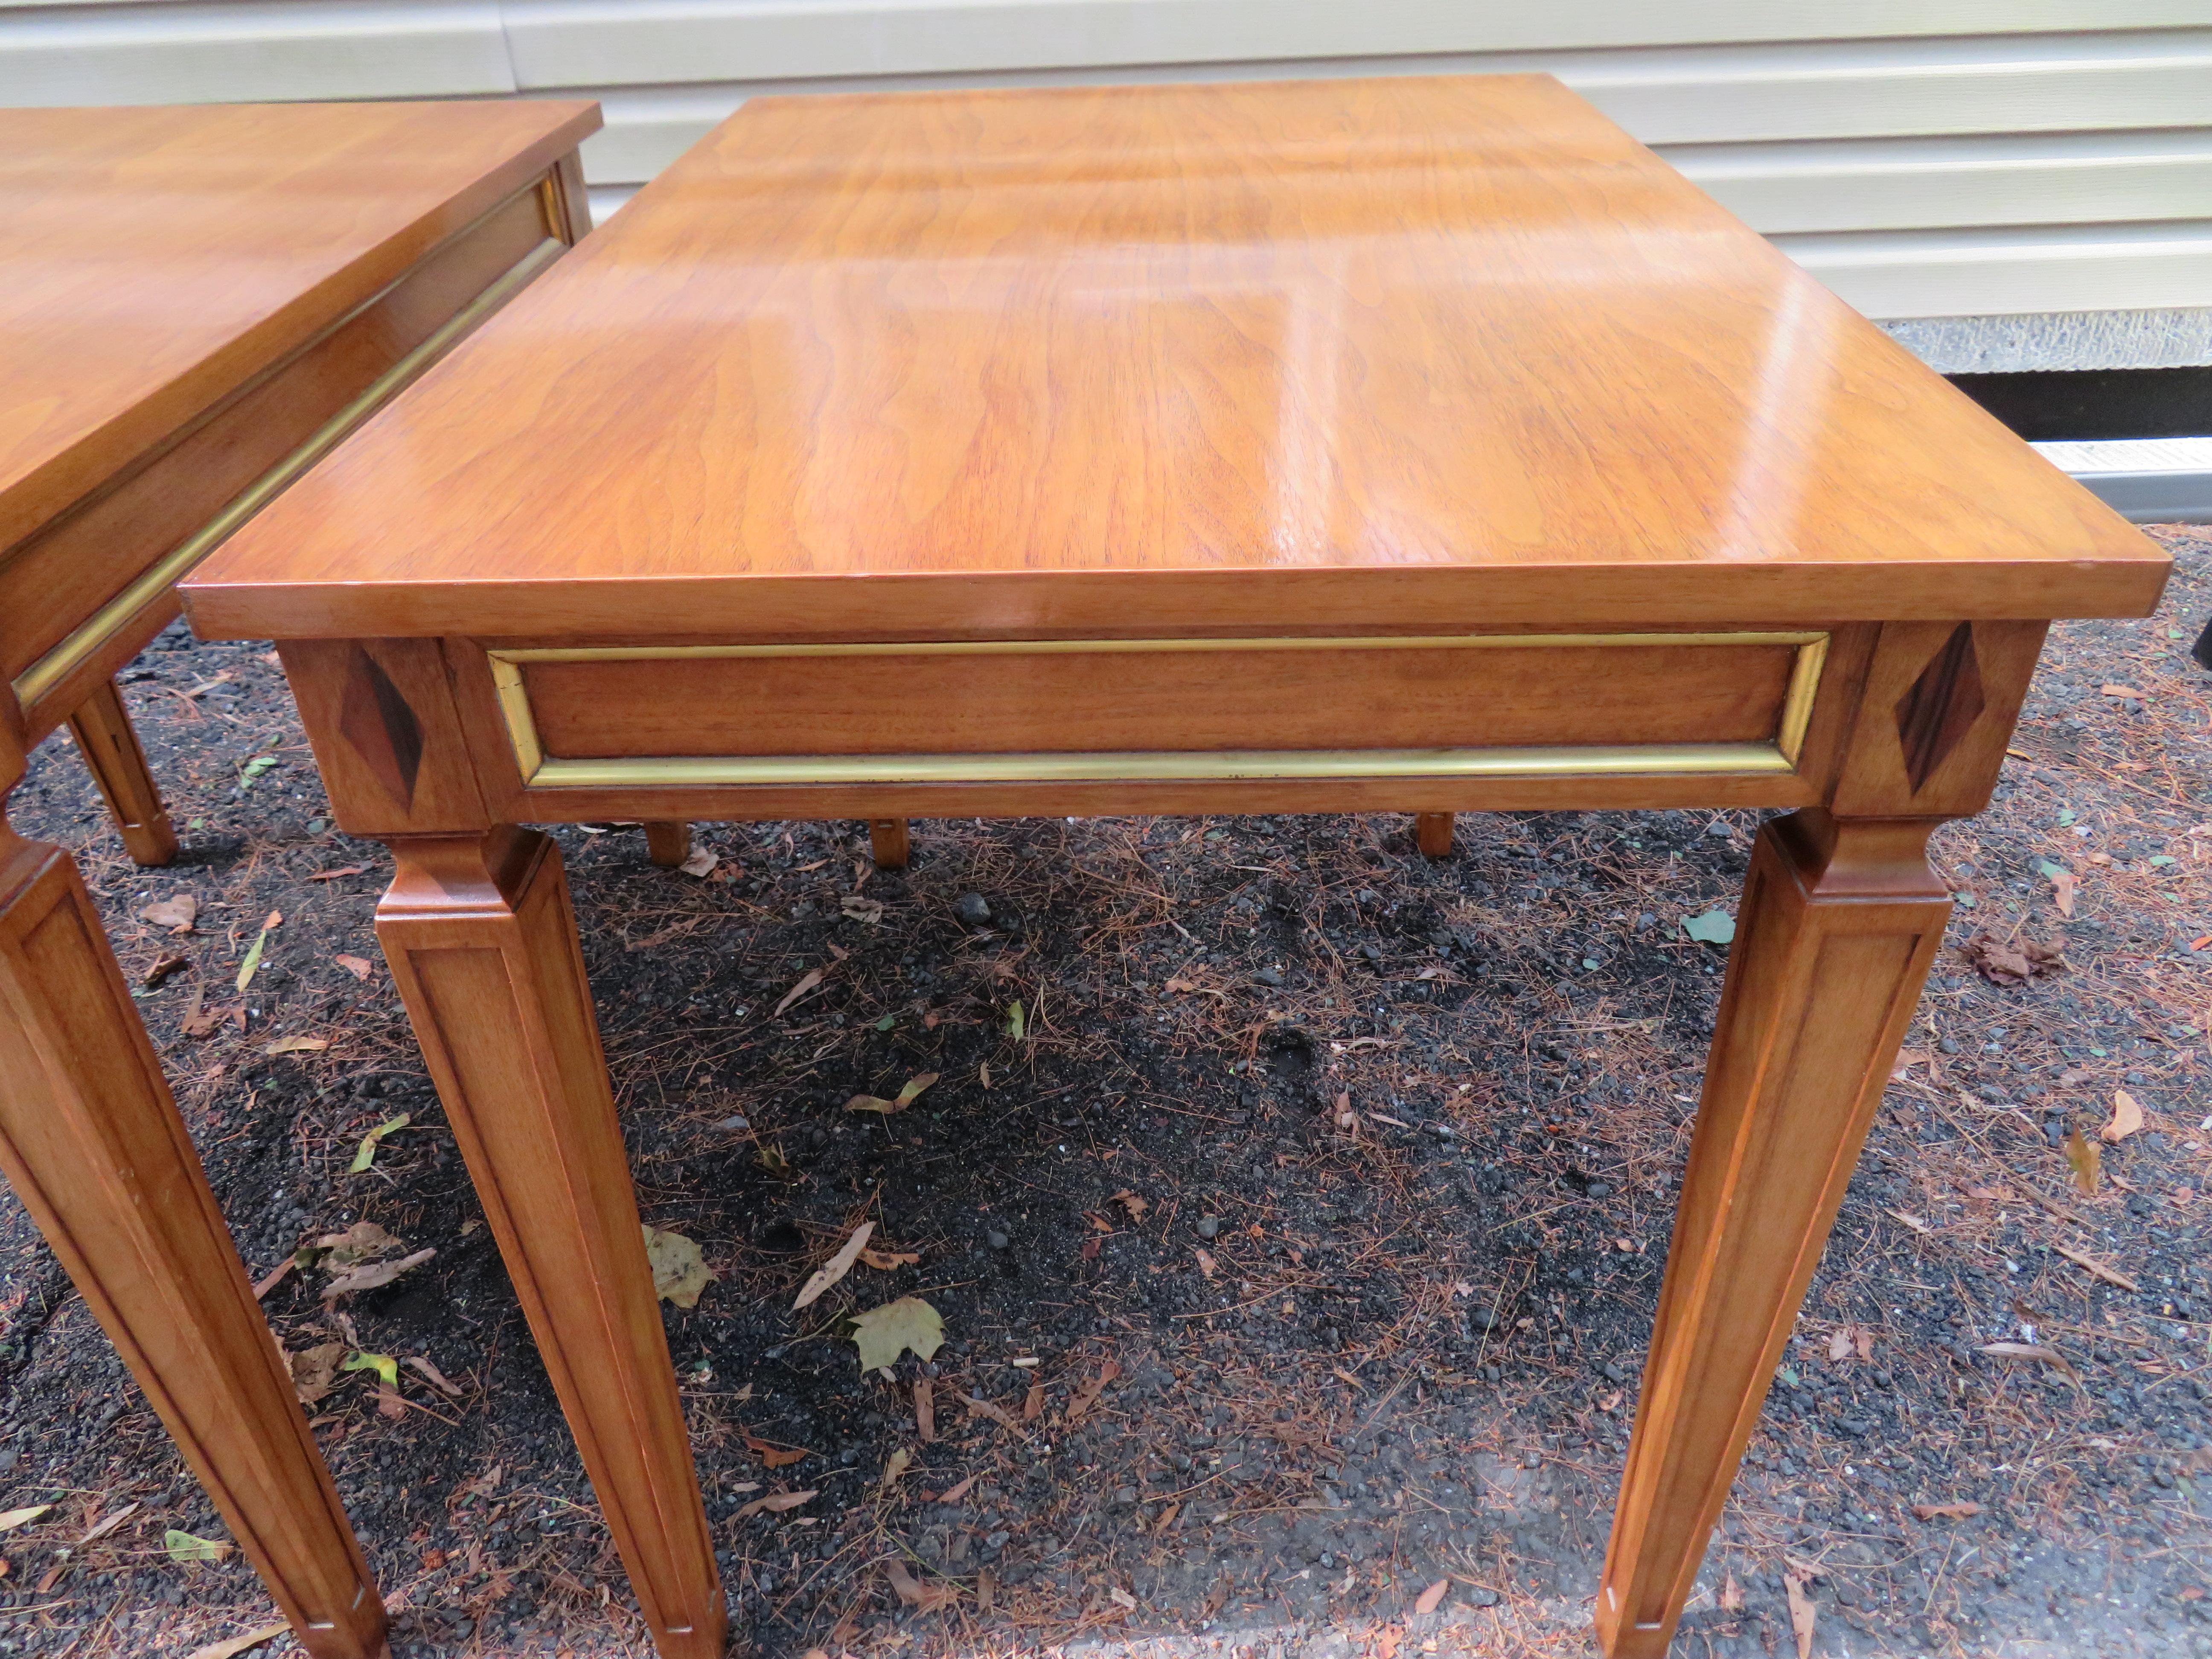 Handsome pair of Maison Jansen style walnut side end tables. These tables are well crafted and are in very nice vintage condition. They came from a magnificent home filled with the finest Regency modern furniture-looked like it was right out of a